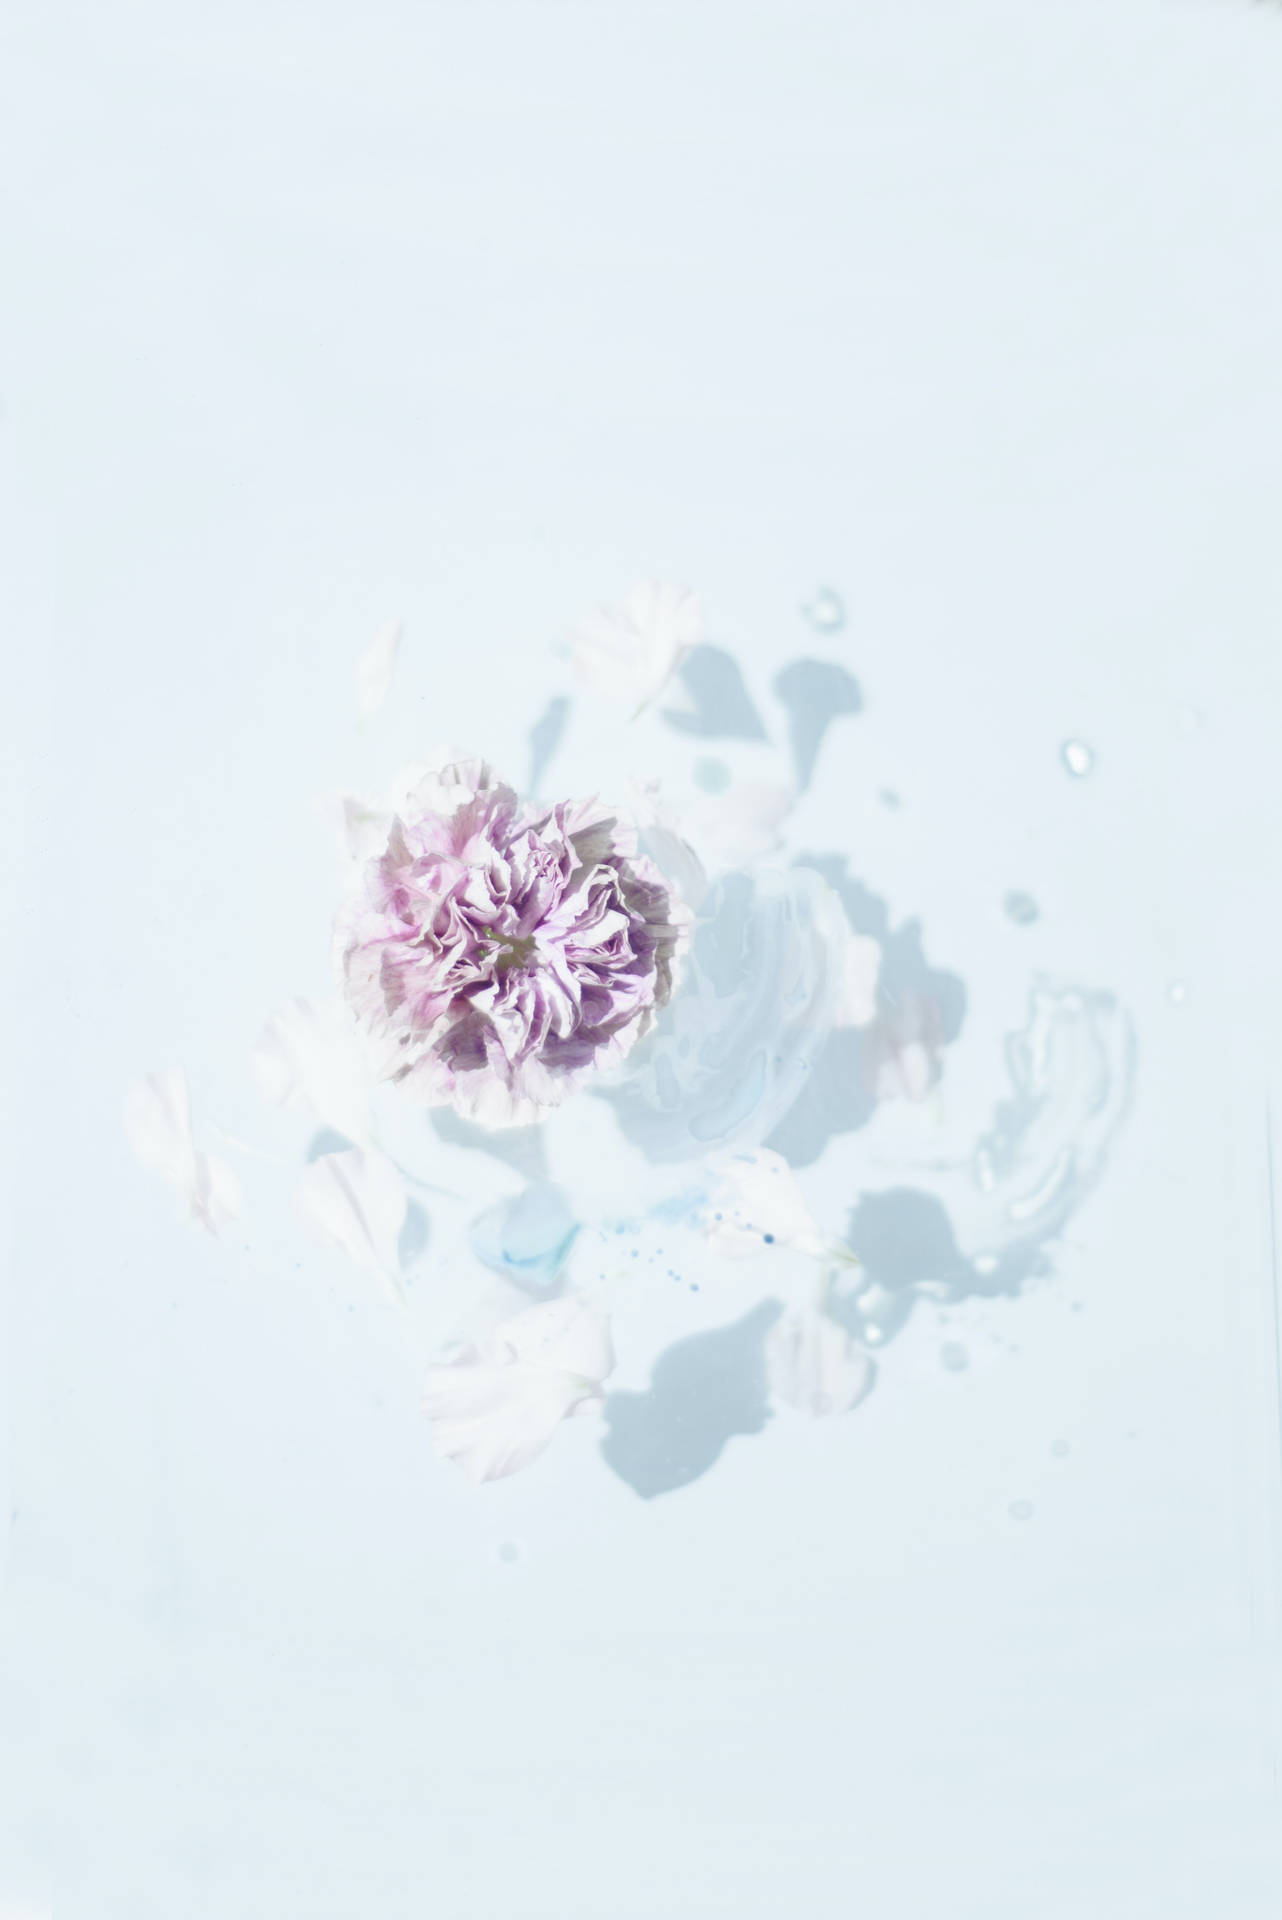 4k Iphone Flower On Water